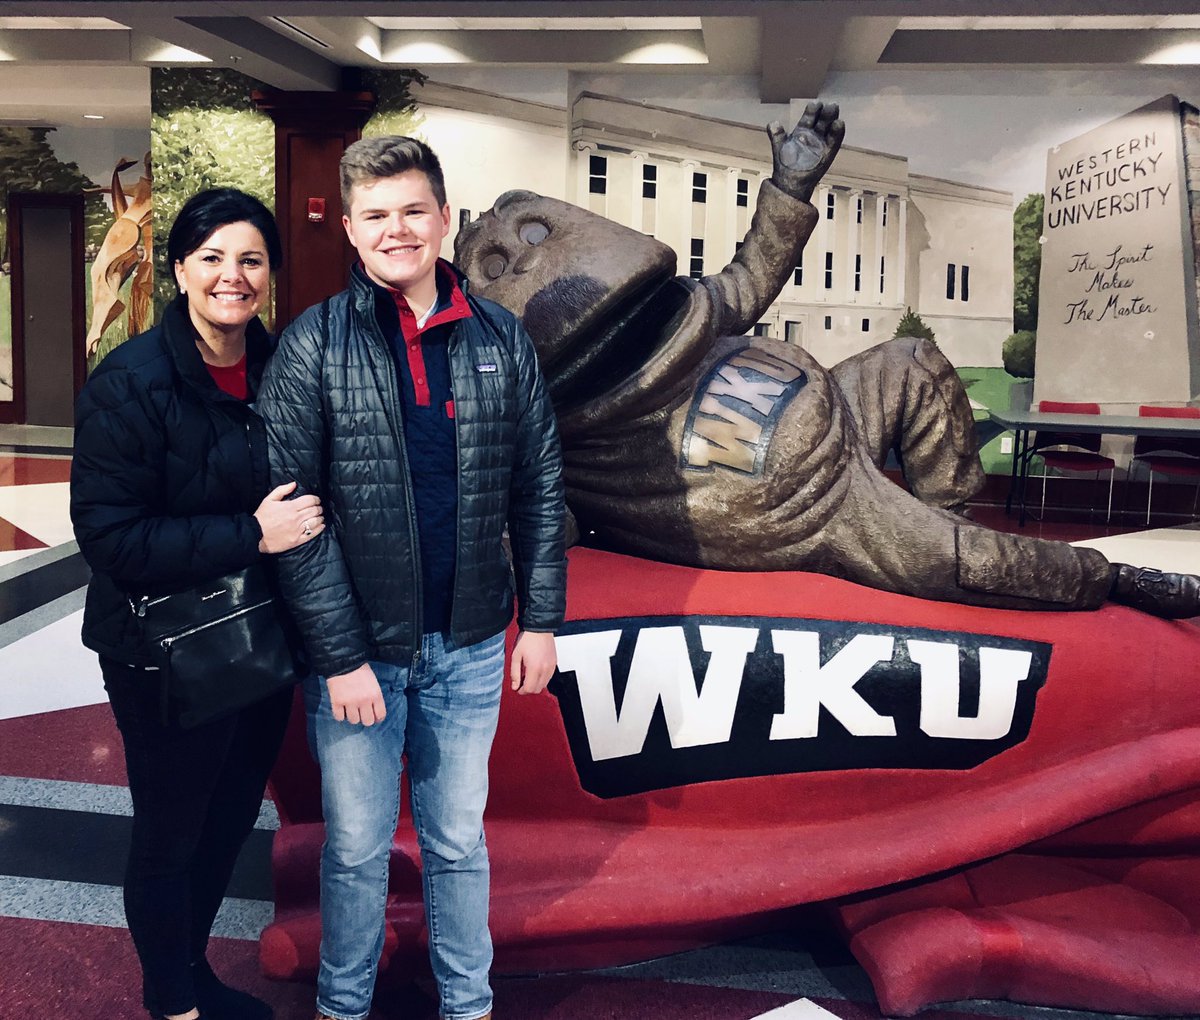 It’s a wild, wonderful world...follow your heart and let the adventure unfold. No more Go Big Blue- it’s GO TOPS now!❤️🖤❤️@WKUAdmissions @WKUHonors @caboni @dawsonmccoun #transferadventure #ClimbWithUs #classof2022